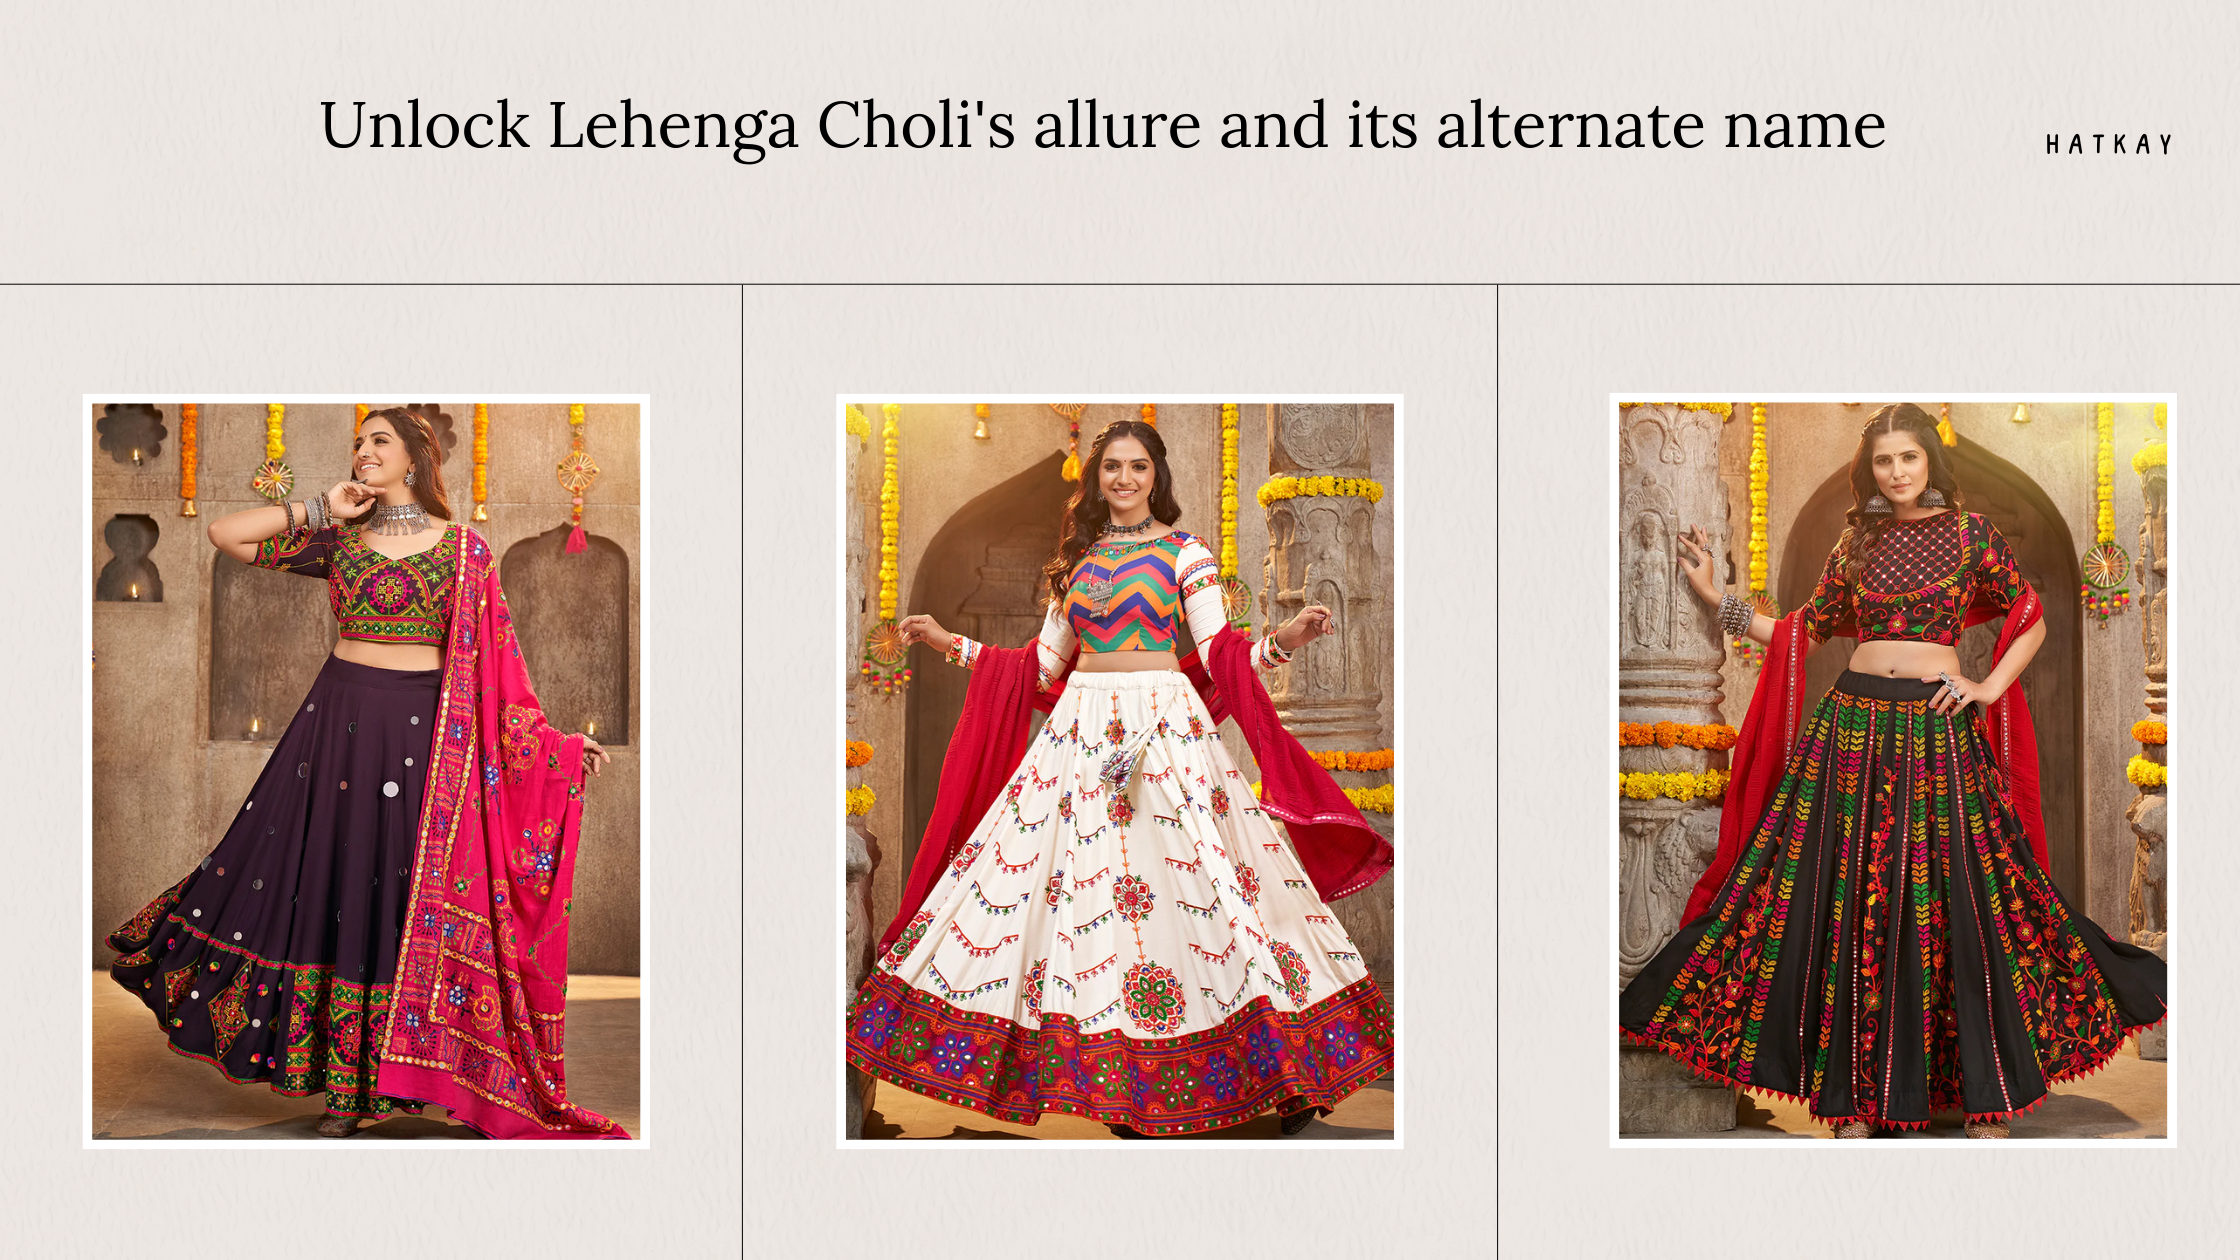 What is Special About Lehenga Choli? What is the Other Name of Lehenga Choli?